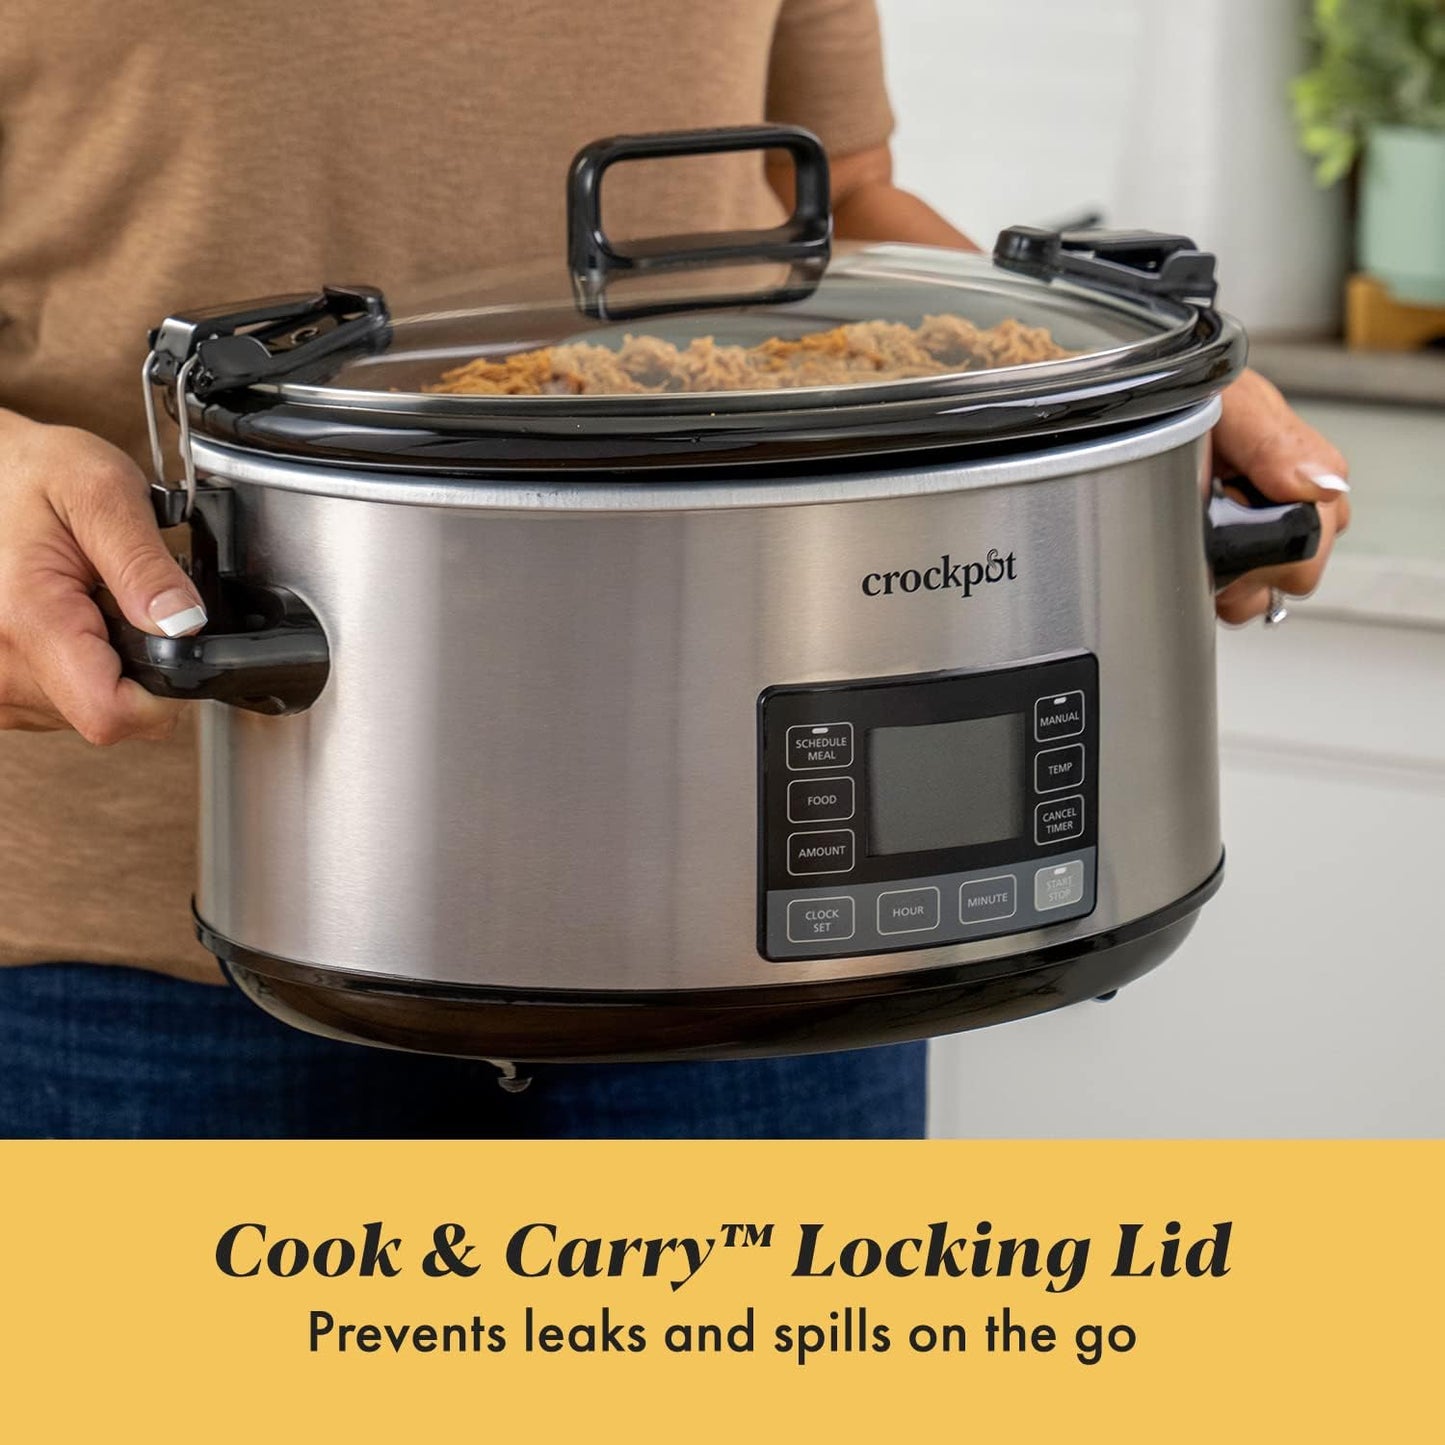 Crock-Pot 7 Quart Portable Programmable Slow Cooker with Timer and Locking Lid, Stainless Steel